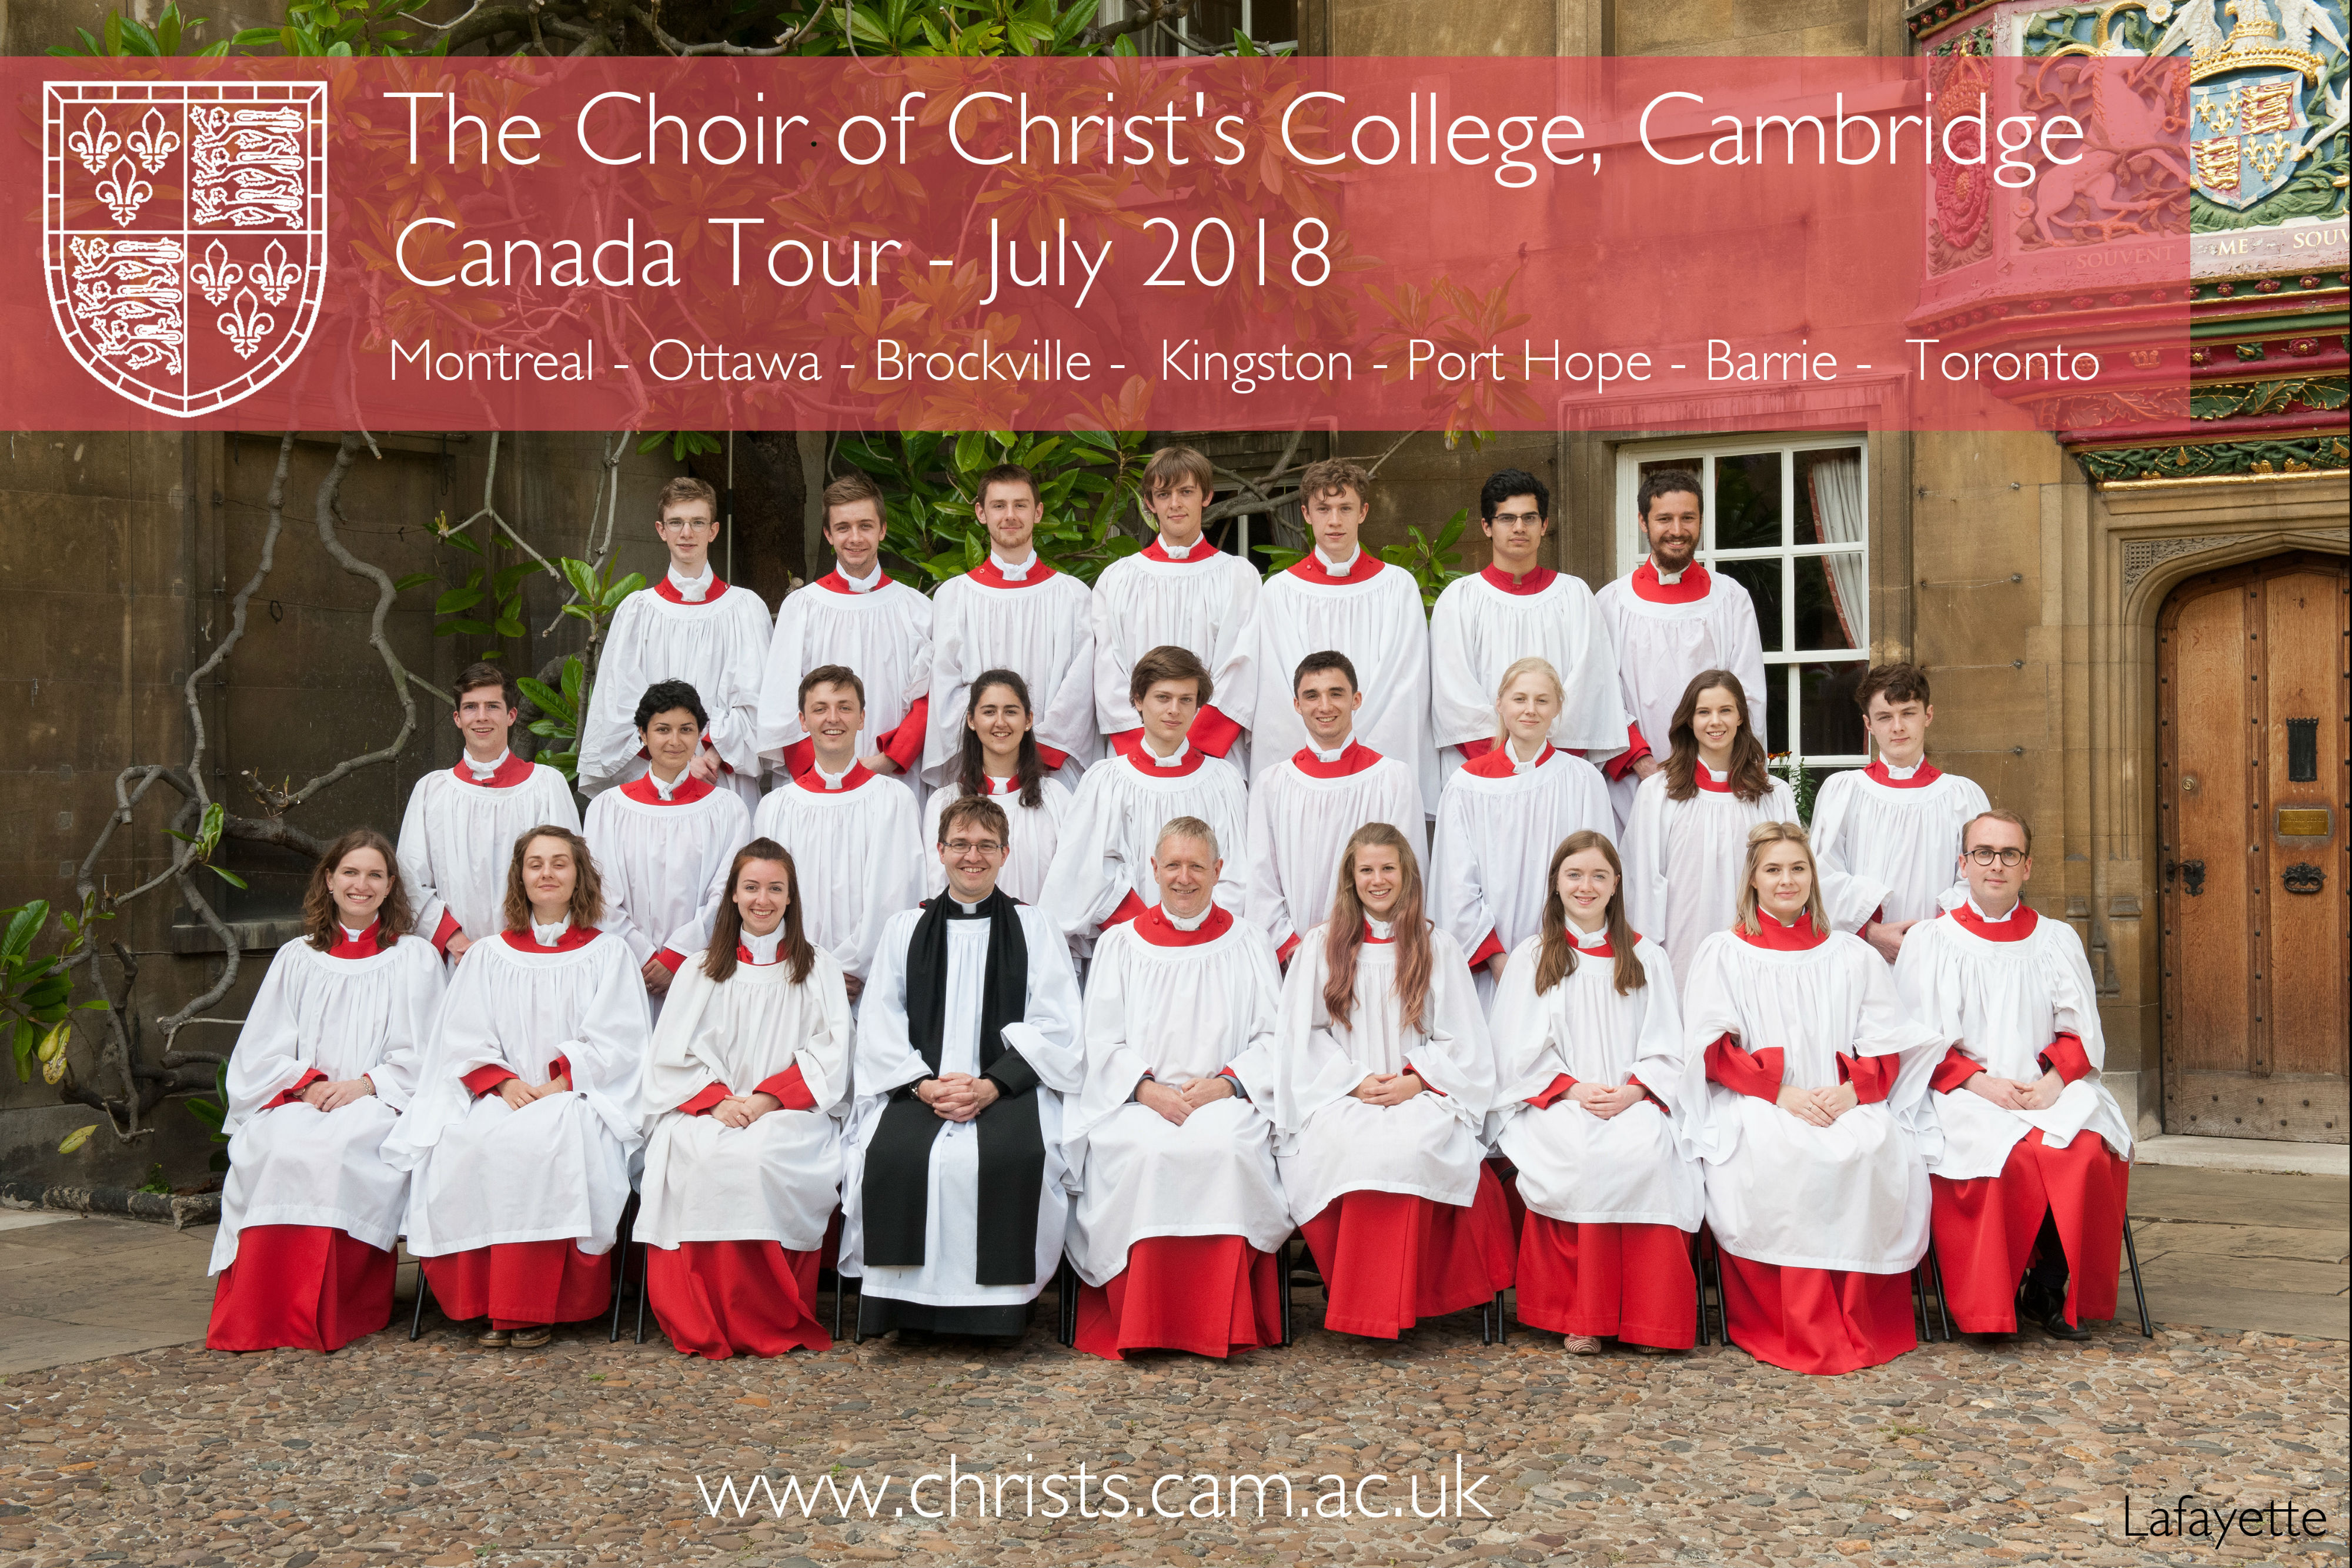 If you have any queries about the tour, please email christschoir@gmail.com and one of our organisers will be in touch.